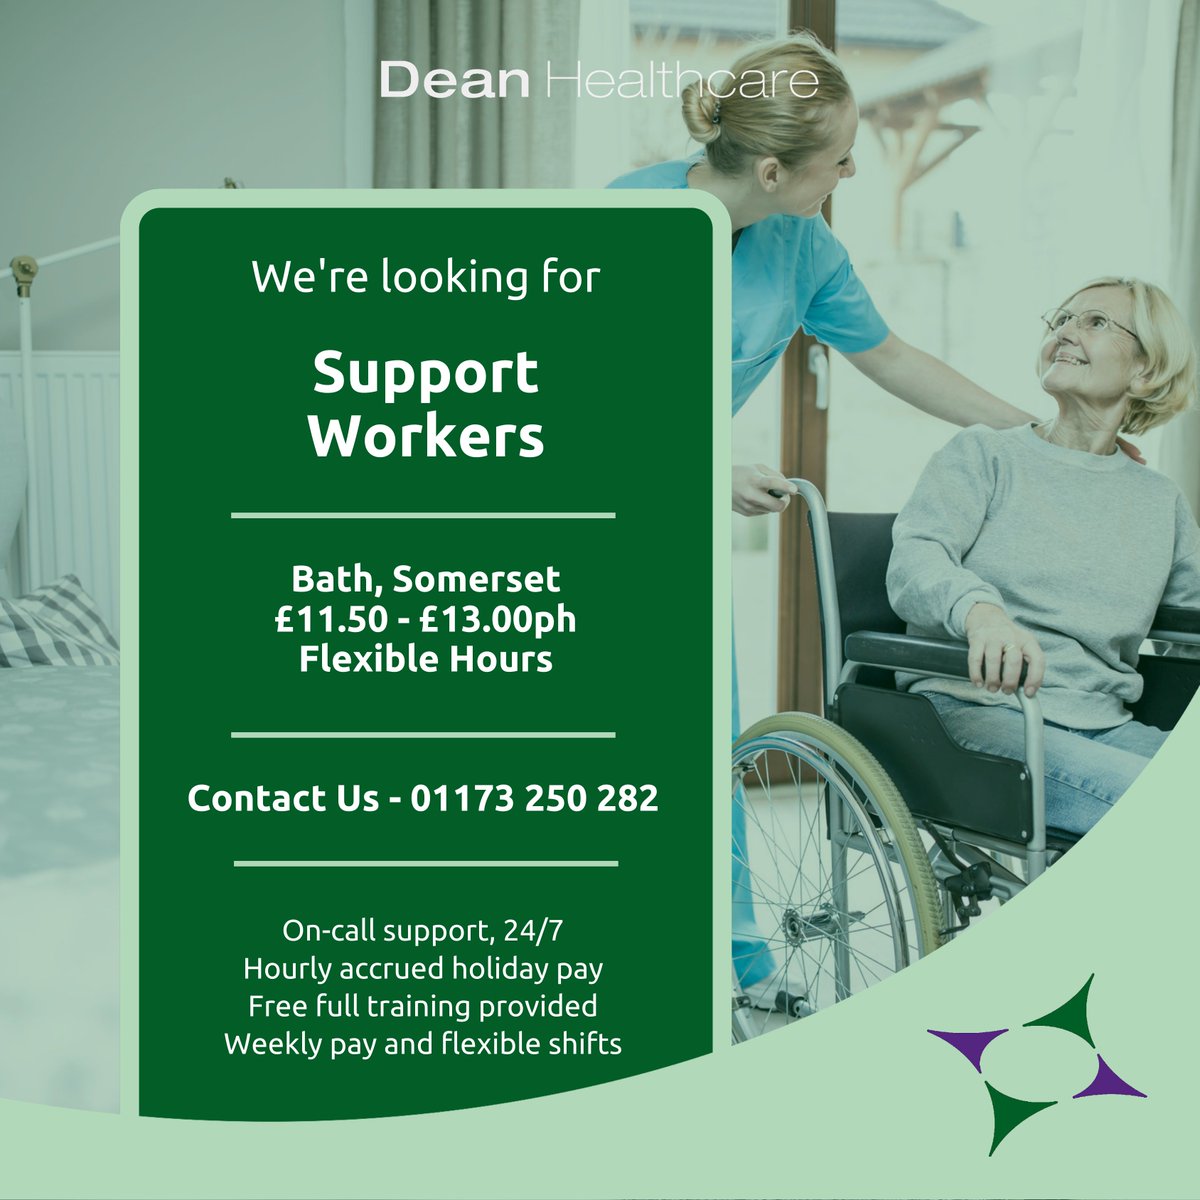 Are you a Support Worker based in or around Bath? We are currently recruiting and would like to hear from you! Get in touch with us today on 01773 250 282 for more information and to apply

#bath #somerset #care #carer #healthcare #supportworkers #supportworker #health #wellbeing